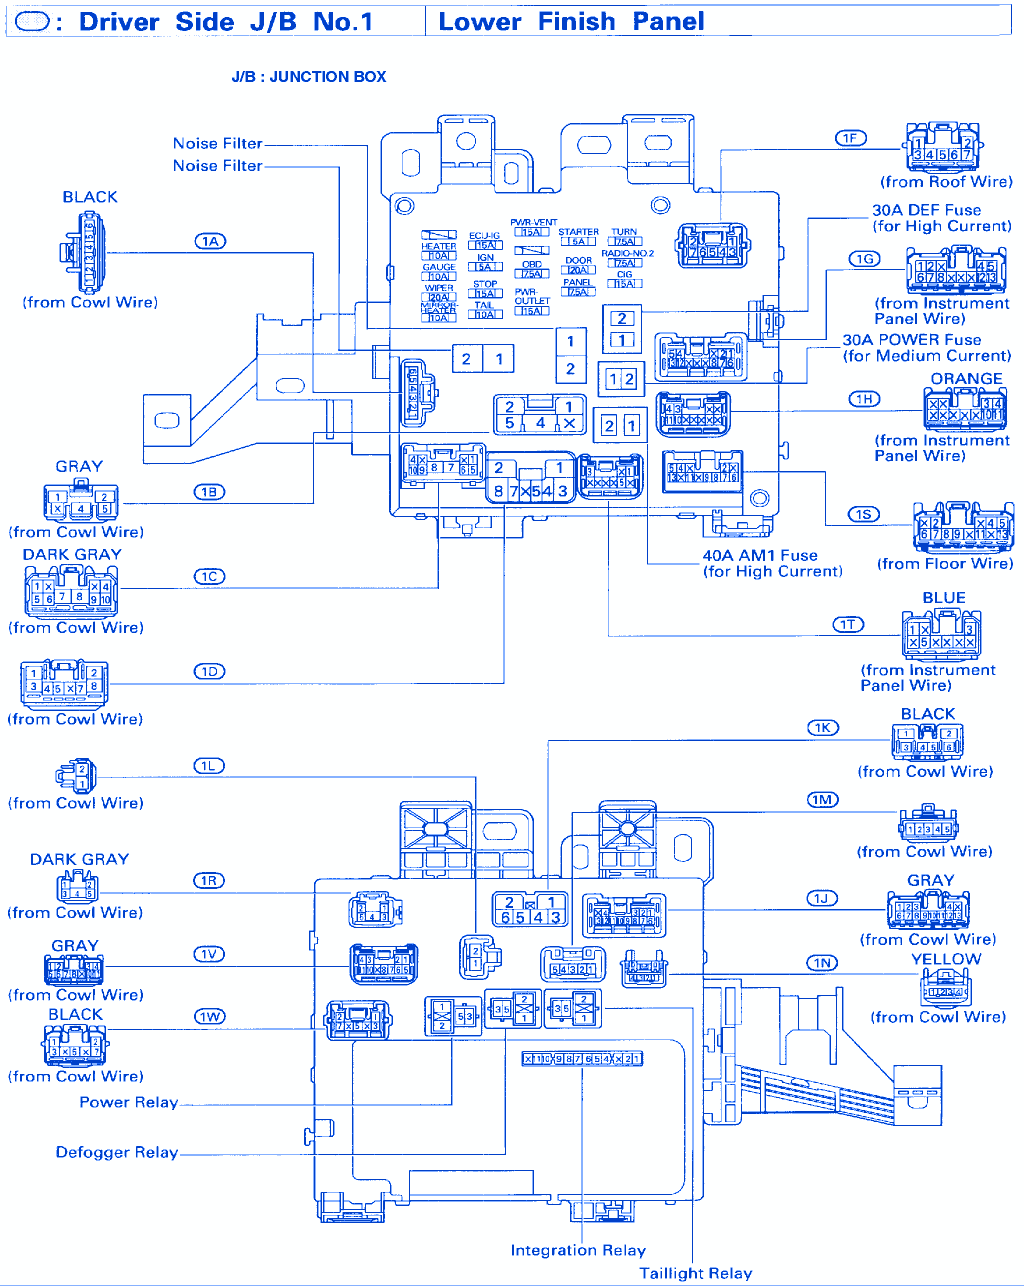 2002 Toyota Tundra Electrical Wiring Diagram from www.carfusebox.com